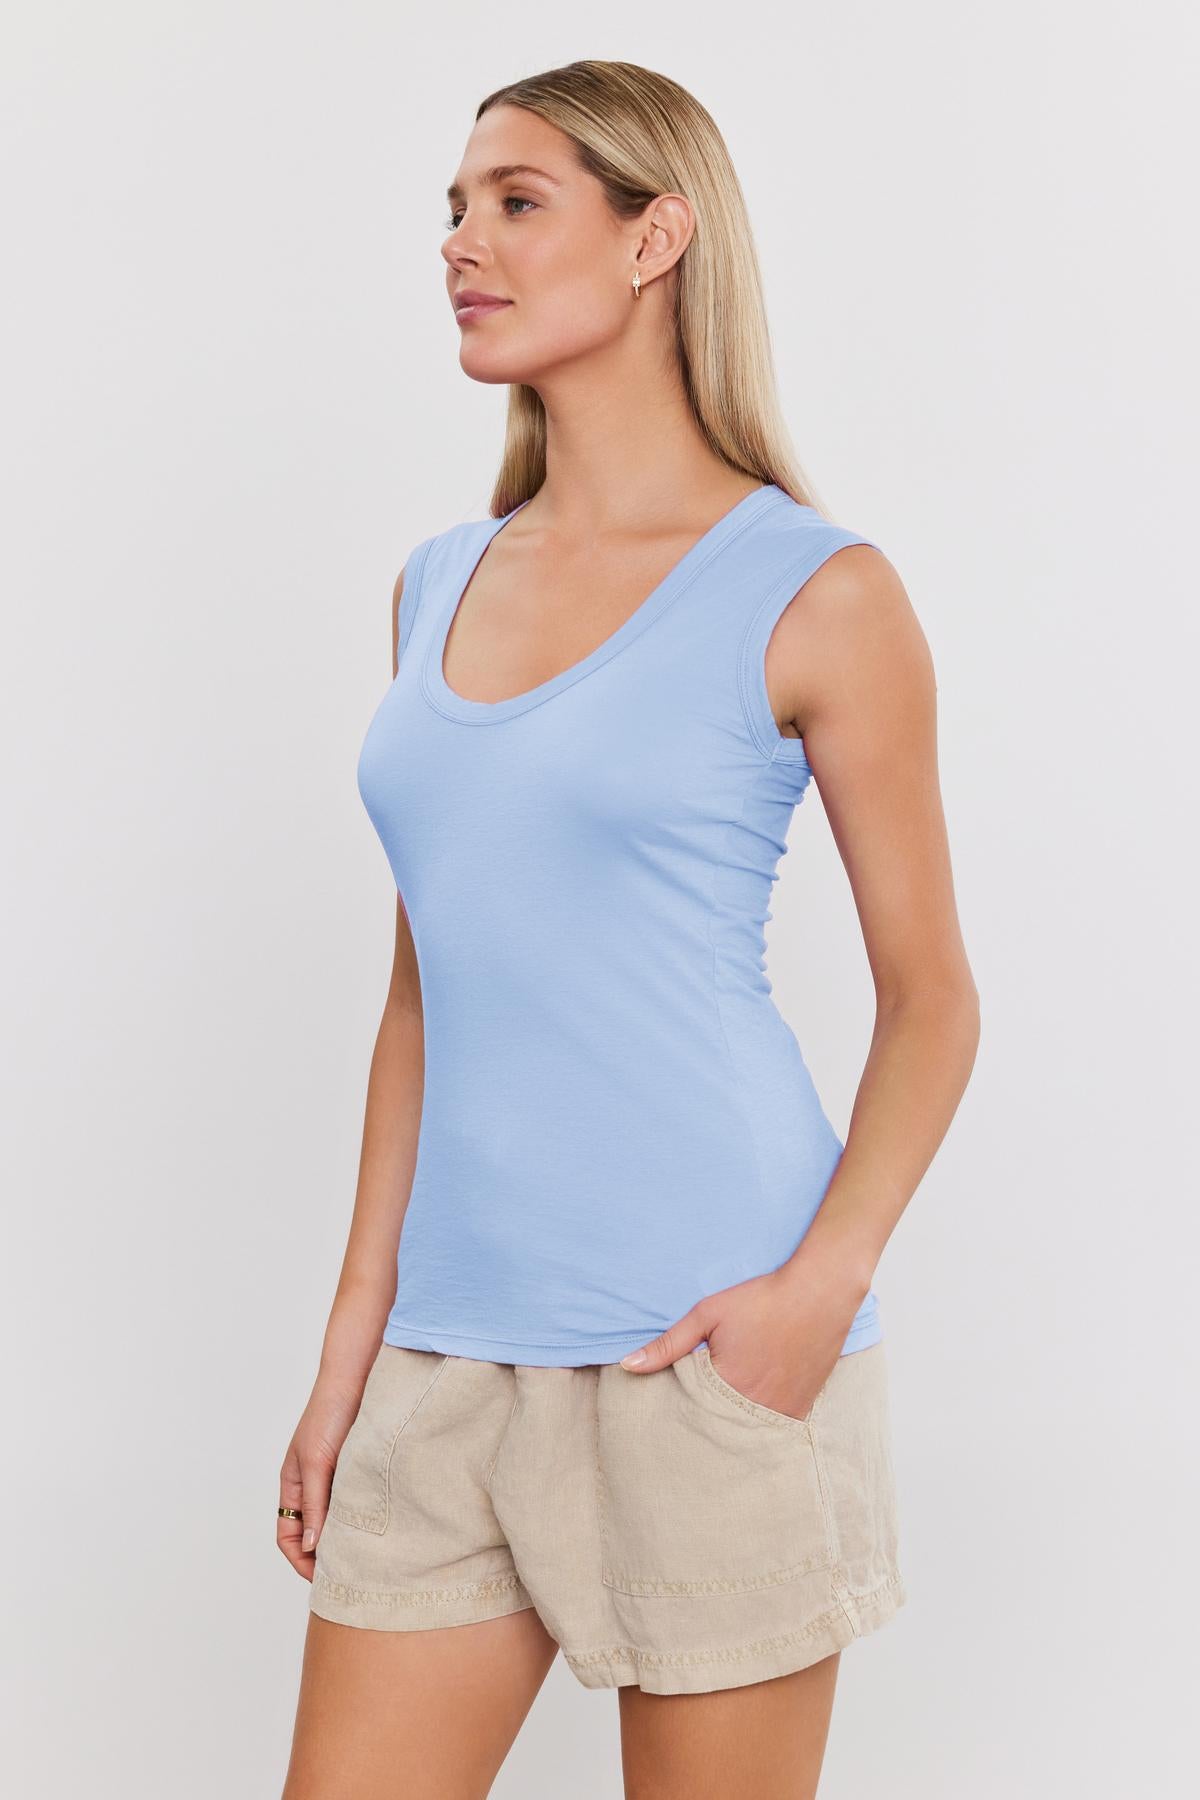 A woman wearing a Velvet by Graham & Spencer Estina Gaucy Whisper fitted tank top in light blue, paired with beige shorts, standing profile to the camera with a neutral expression.-36752924147905